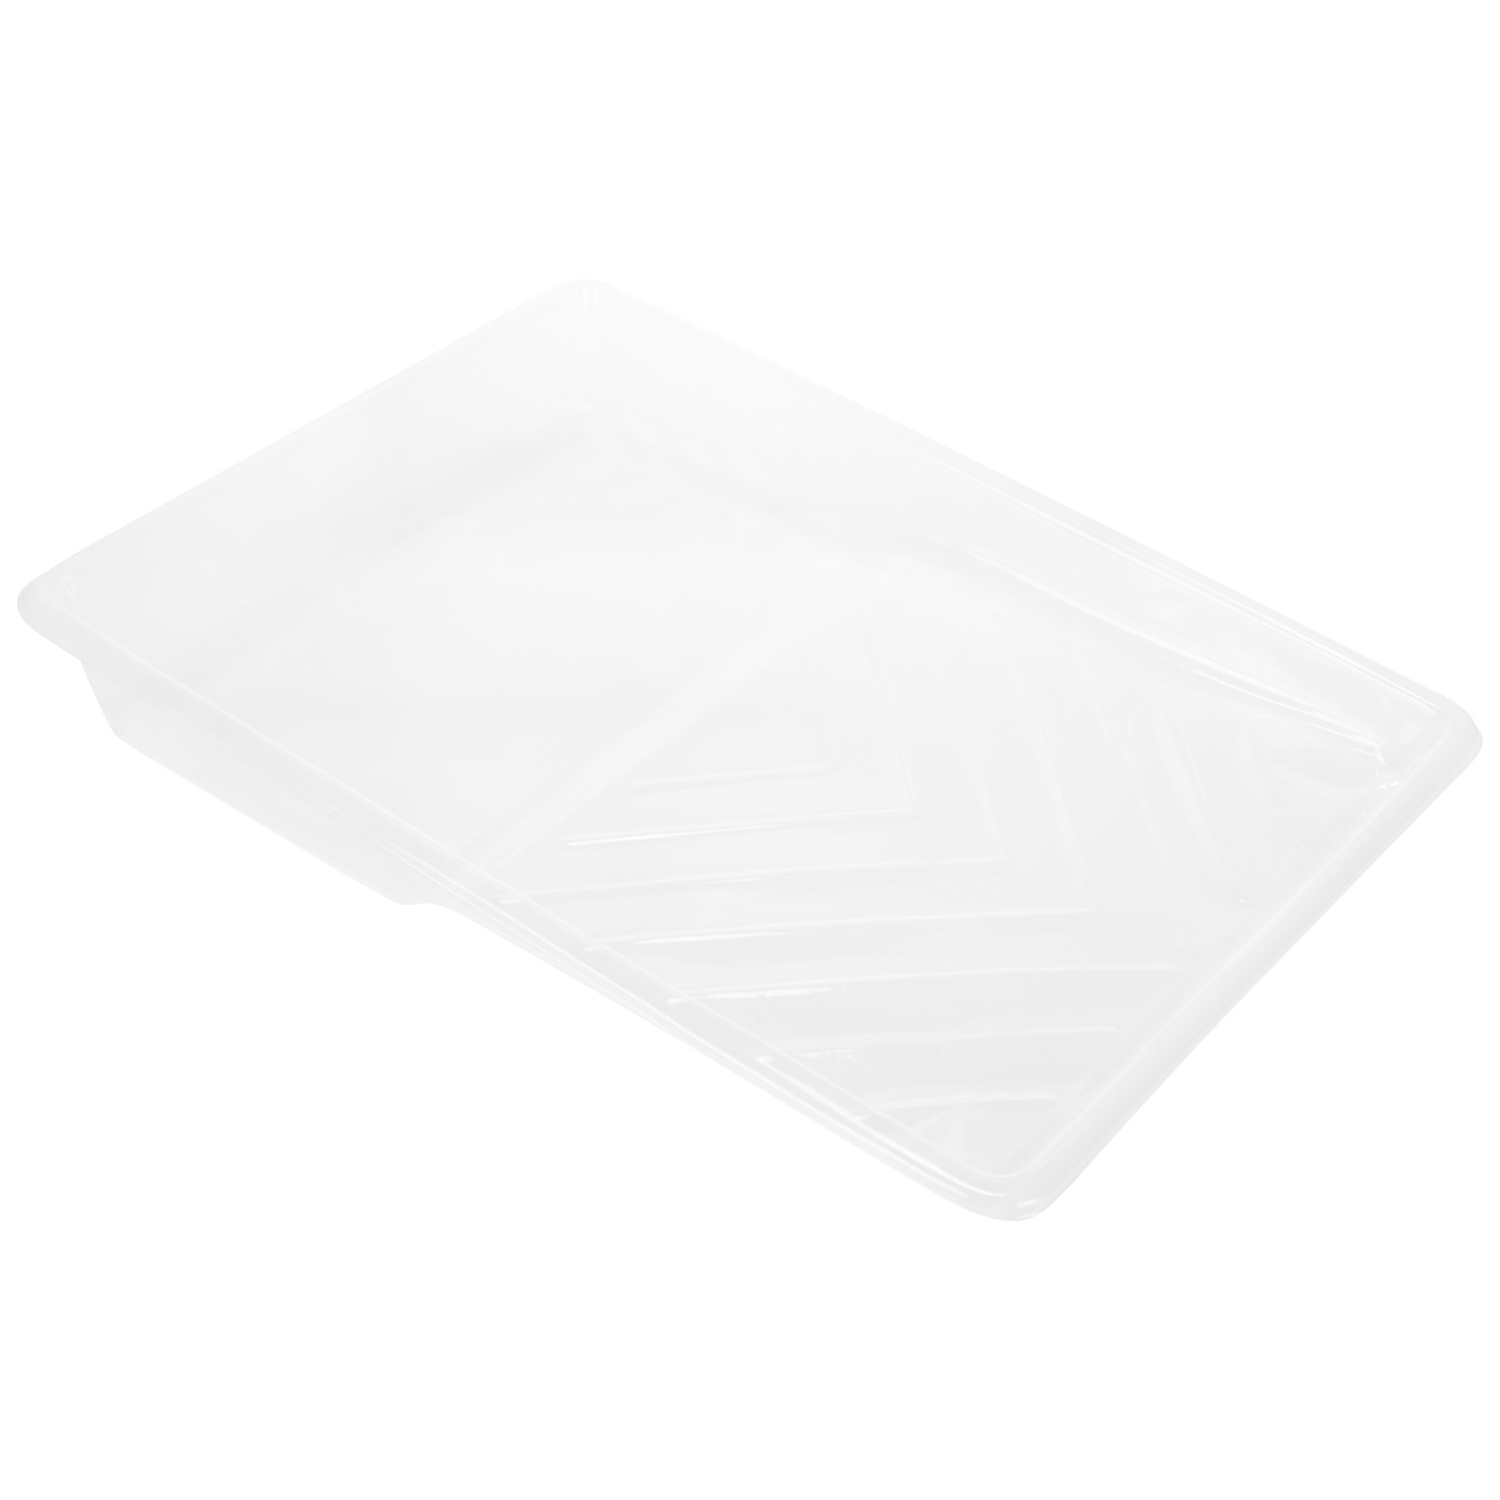 ProDec 9 inch 5 Pack Tray Liners Image